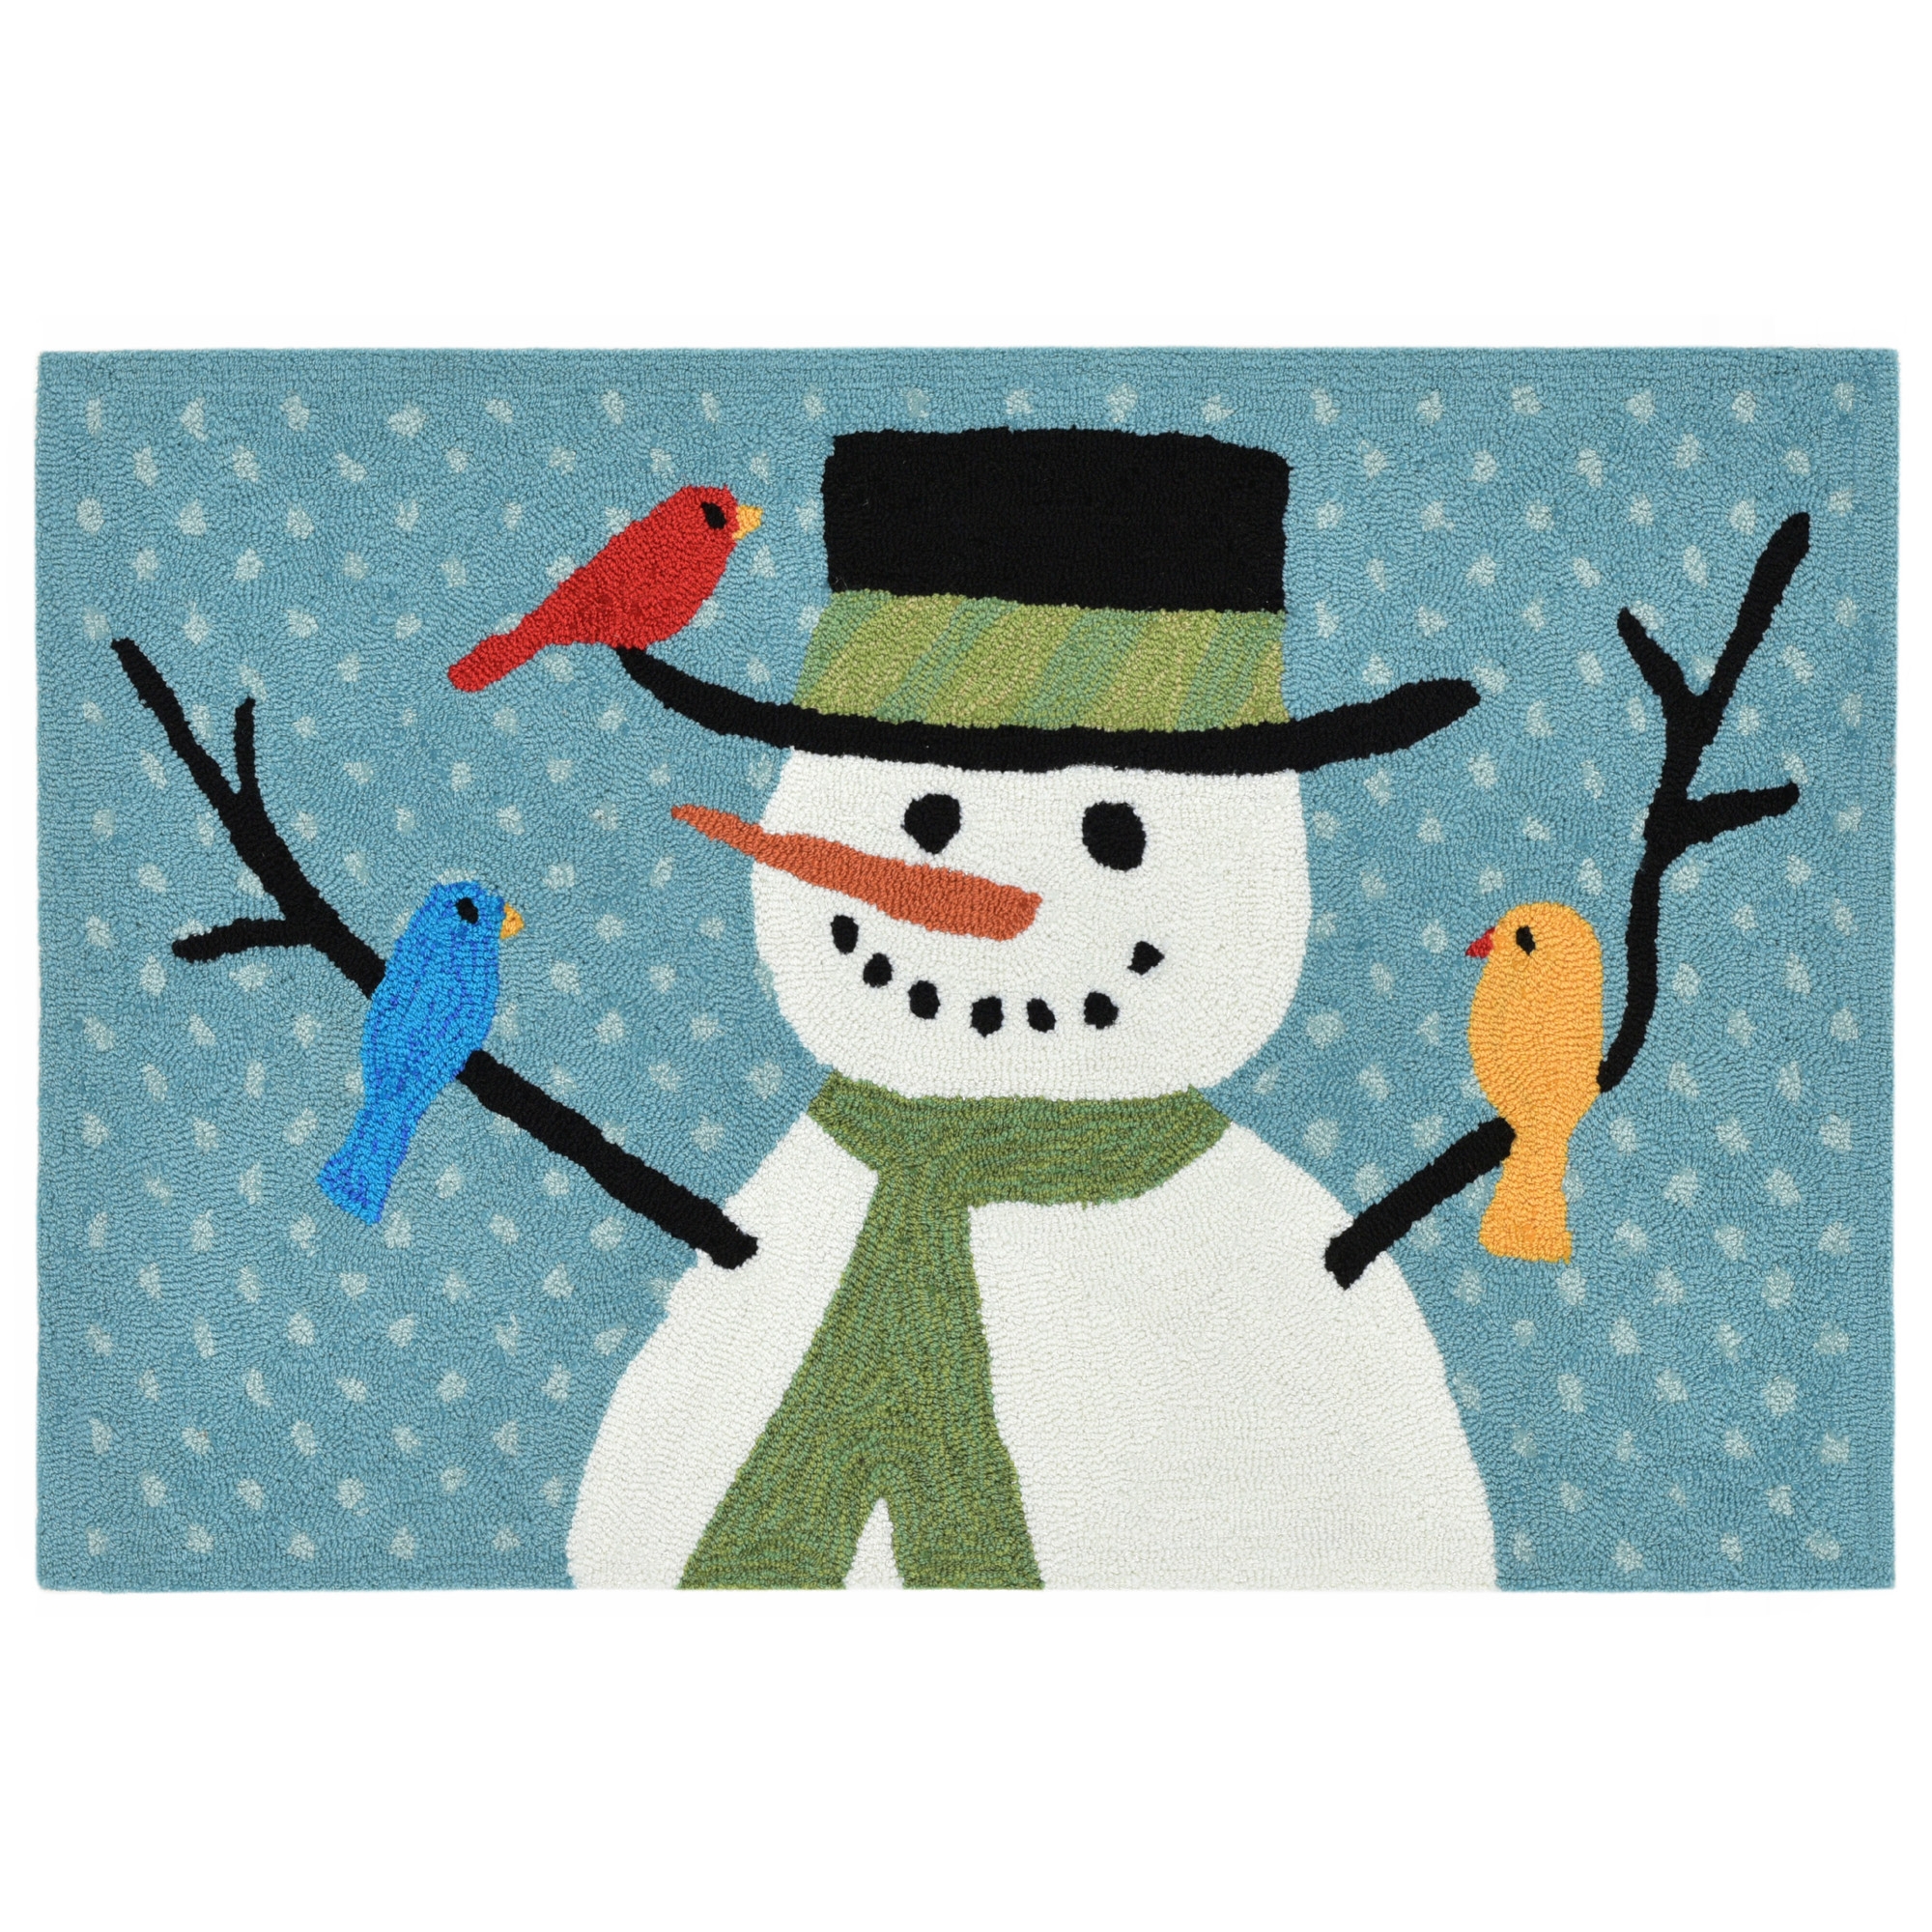 Snowman And Friends Rug 30"x48"